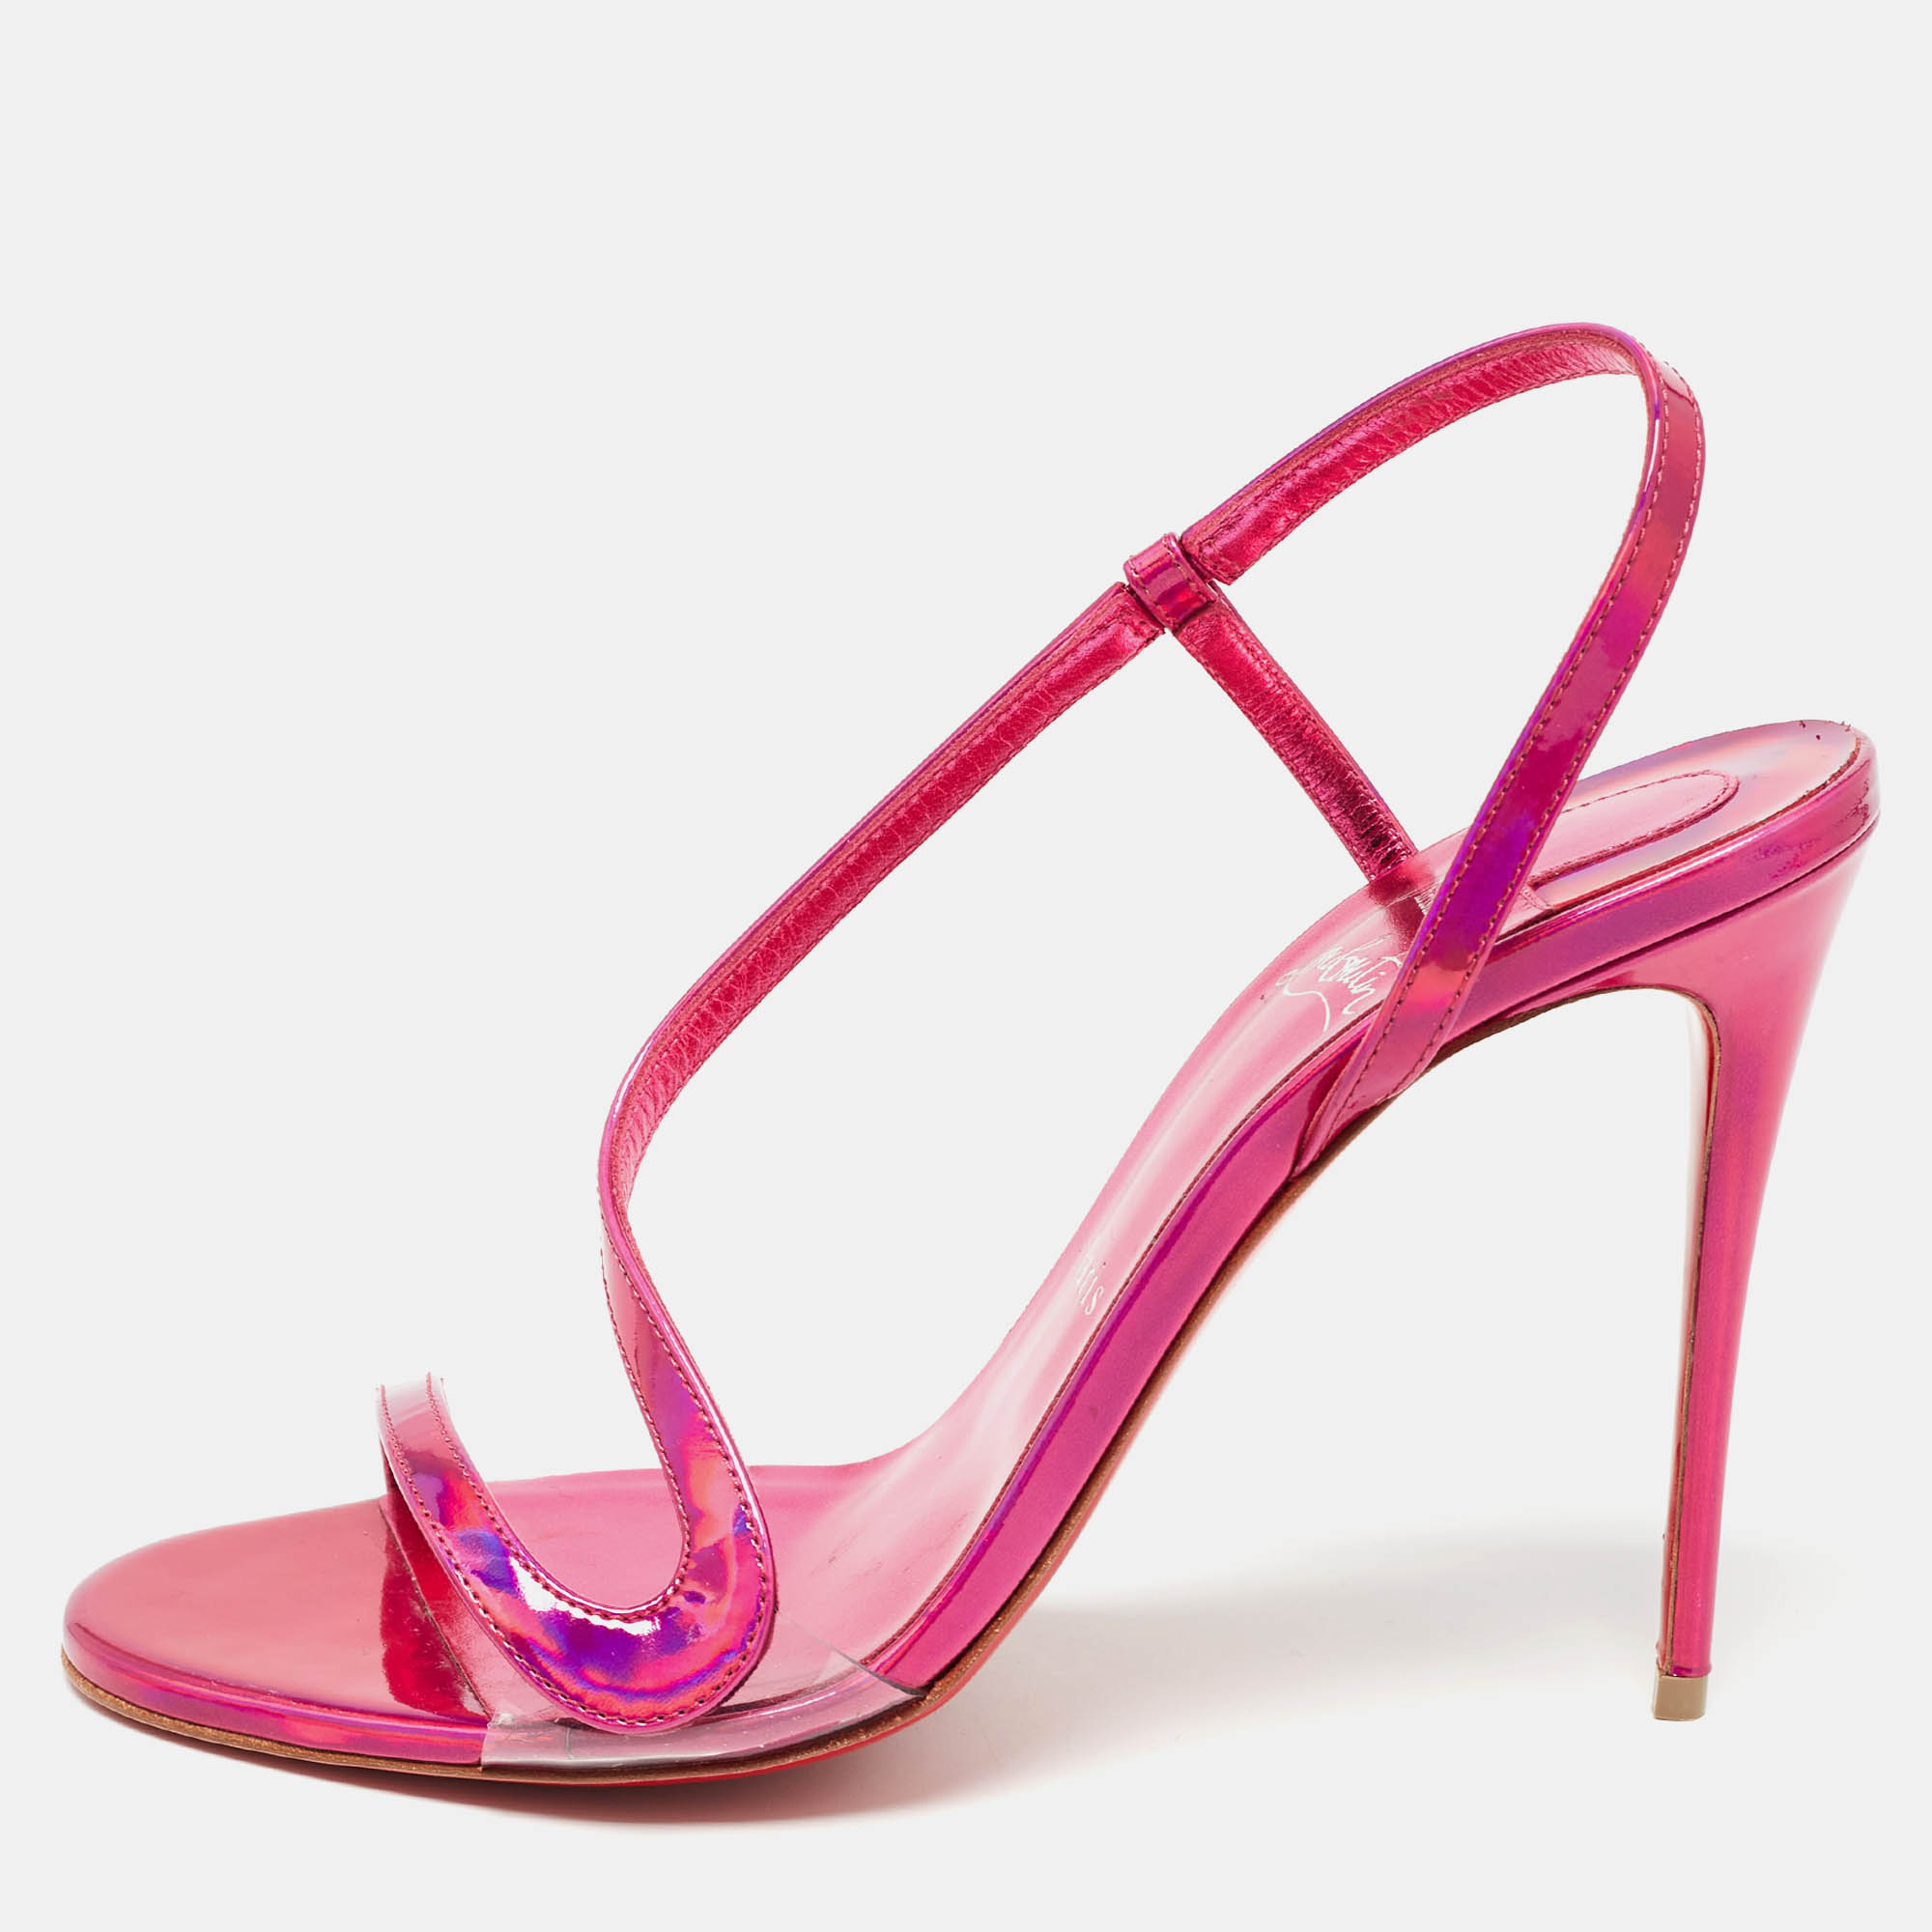 Pre-owned Christian Louboutin Metallic Pink Leather Rosalie Sandals Size 39